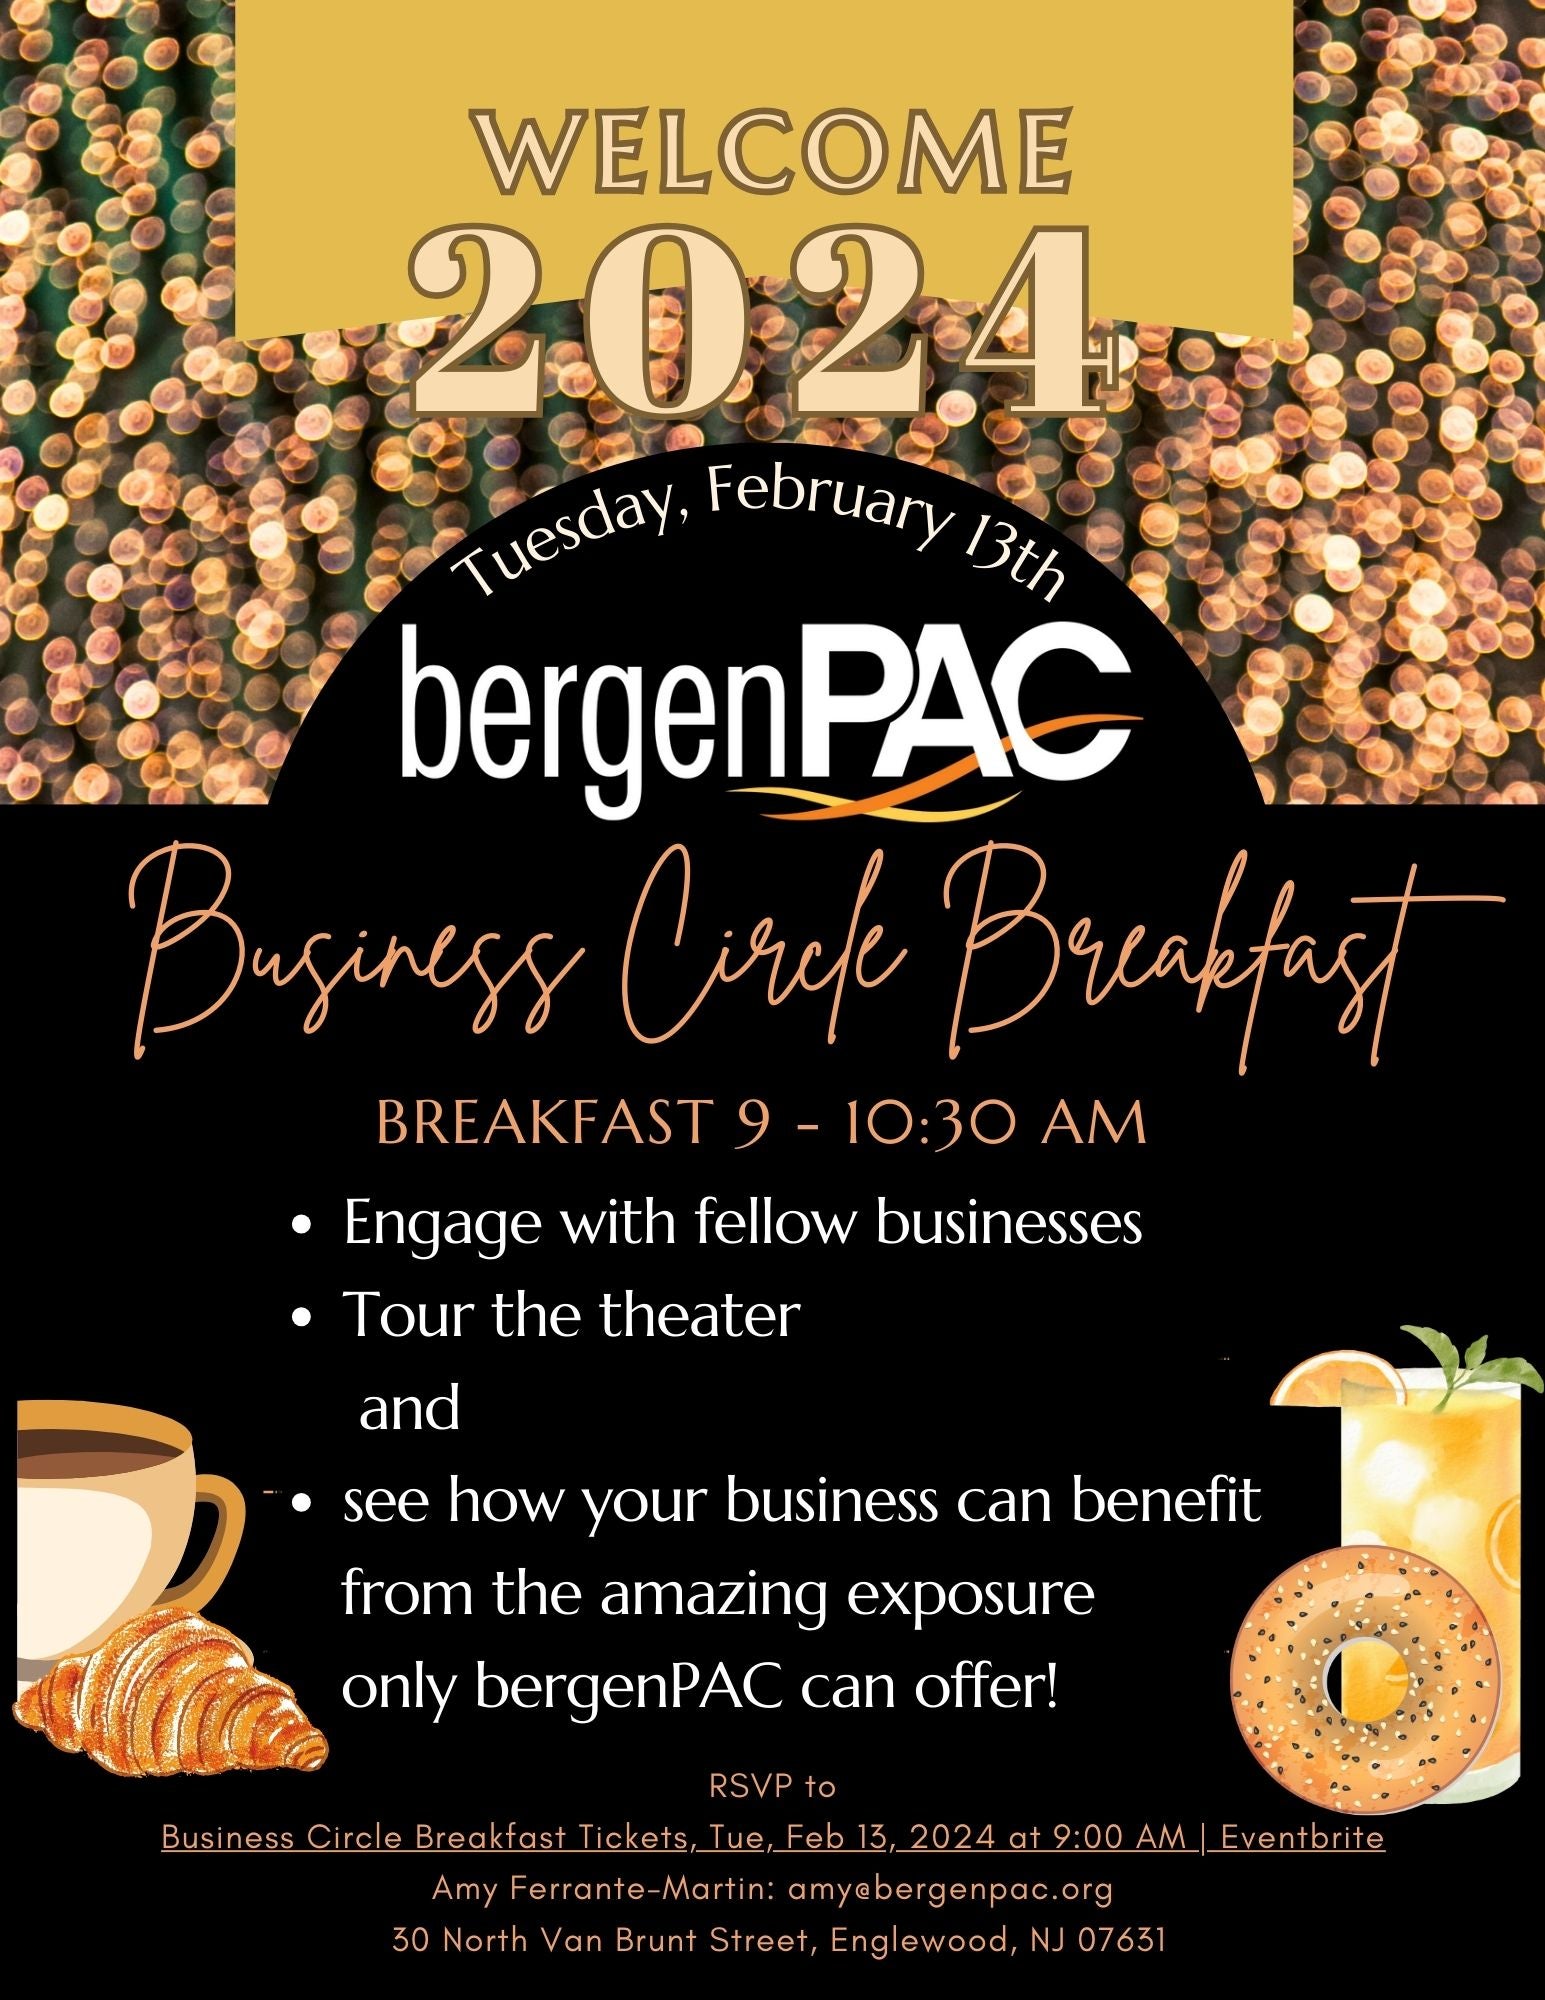 Business Circle Breakfast - POSTPONED DUE TO SNOW FORECAST